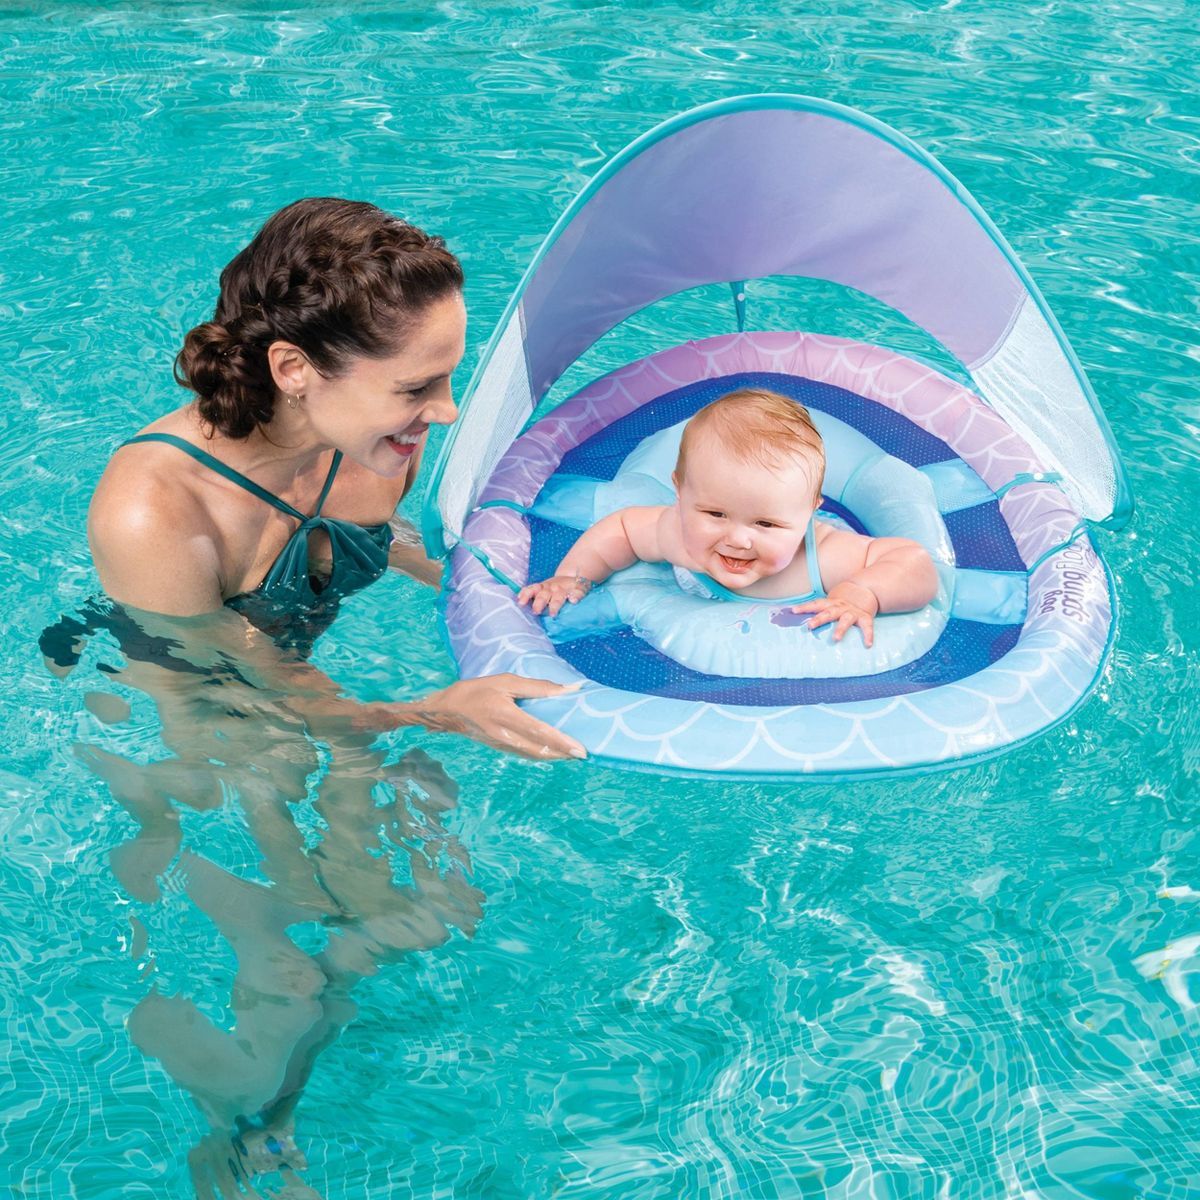 Swimways Sun Canopy Spring Float with Hyper-Flate Valve -  Mermaid | Target